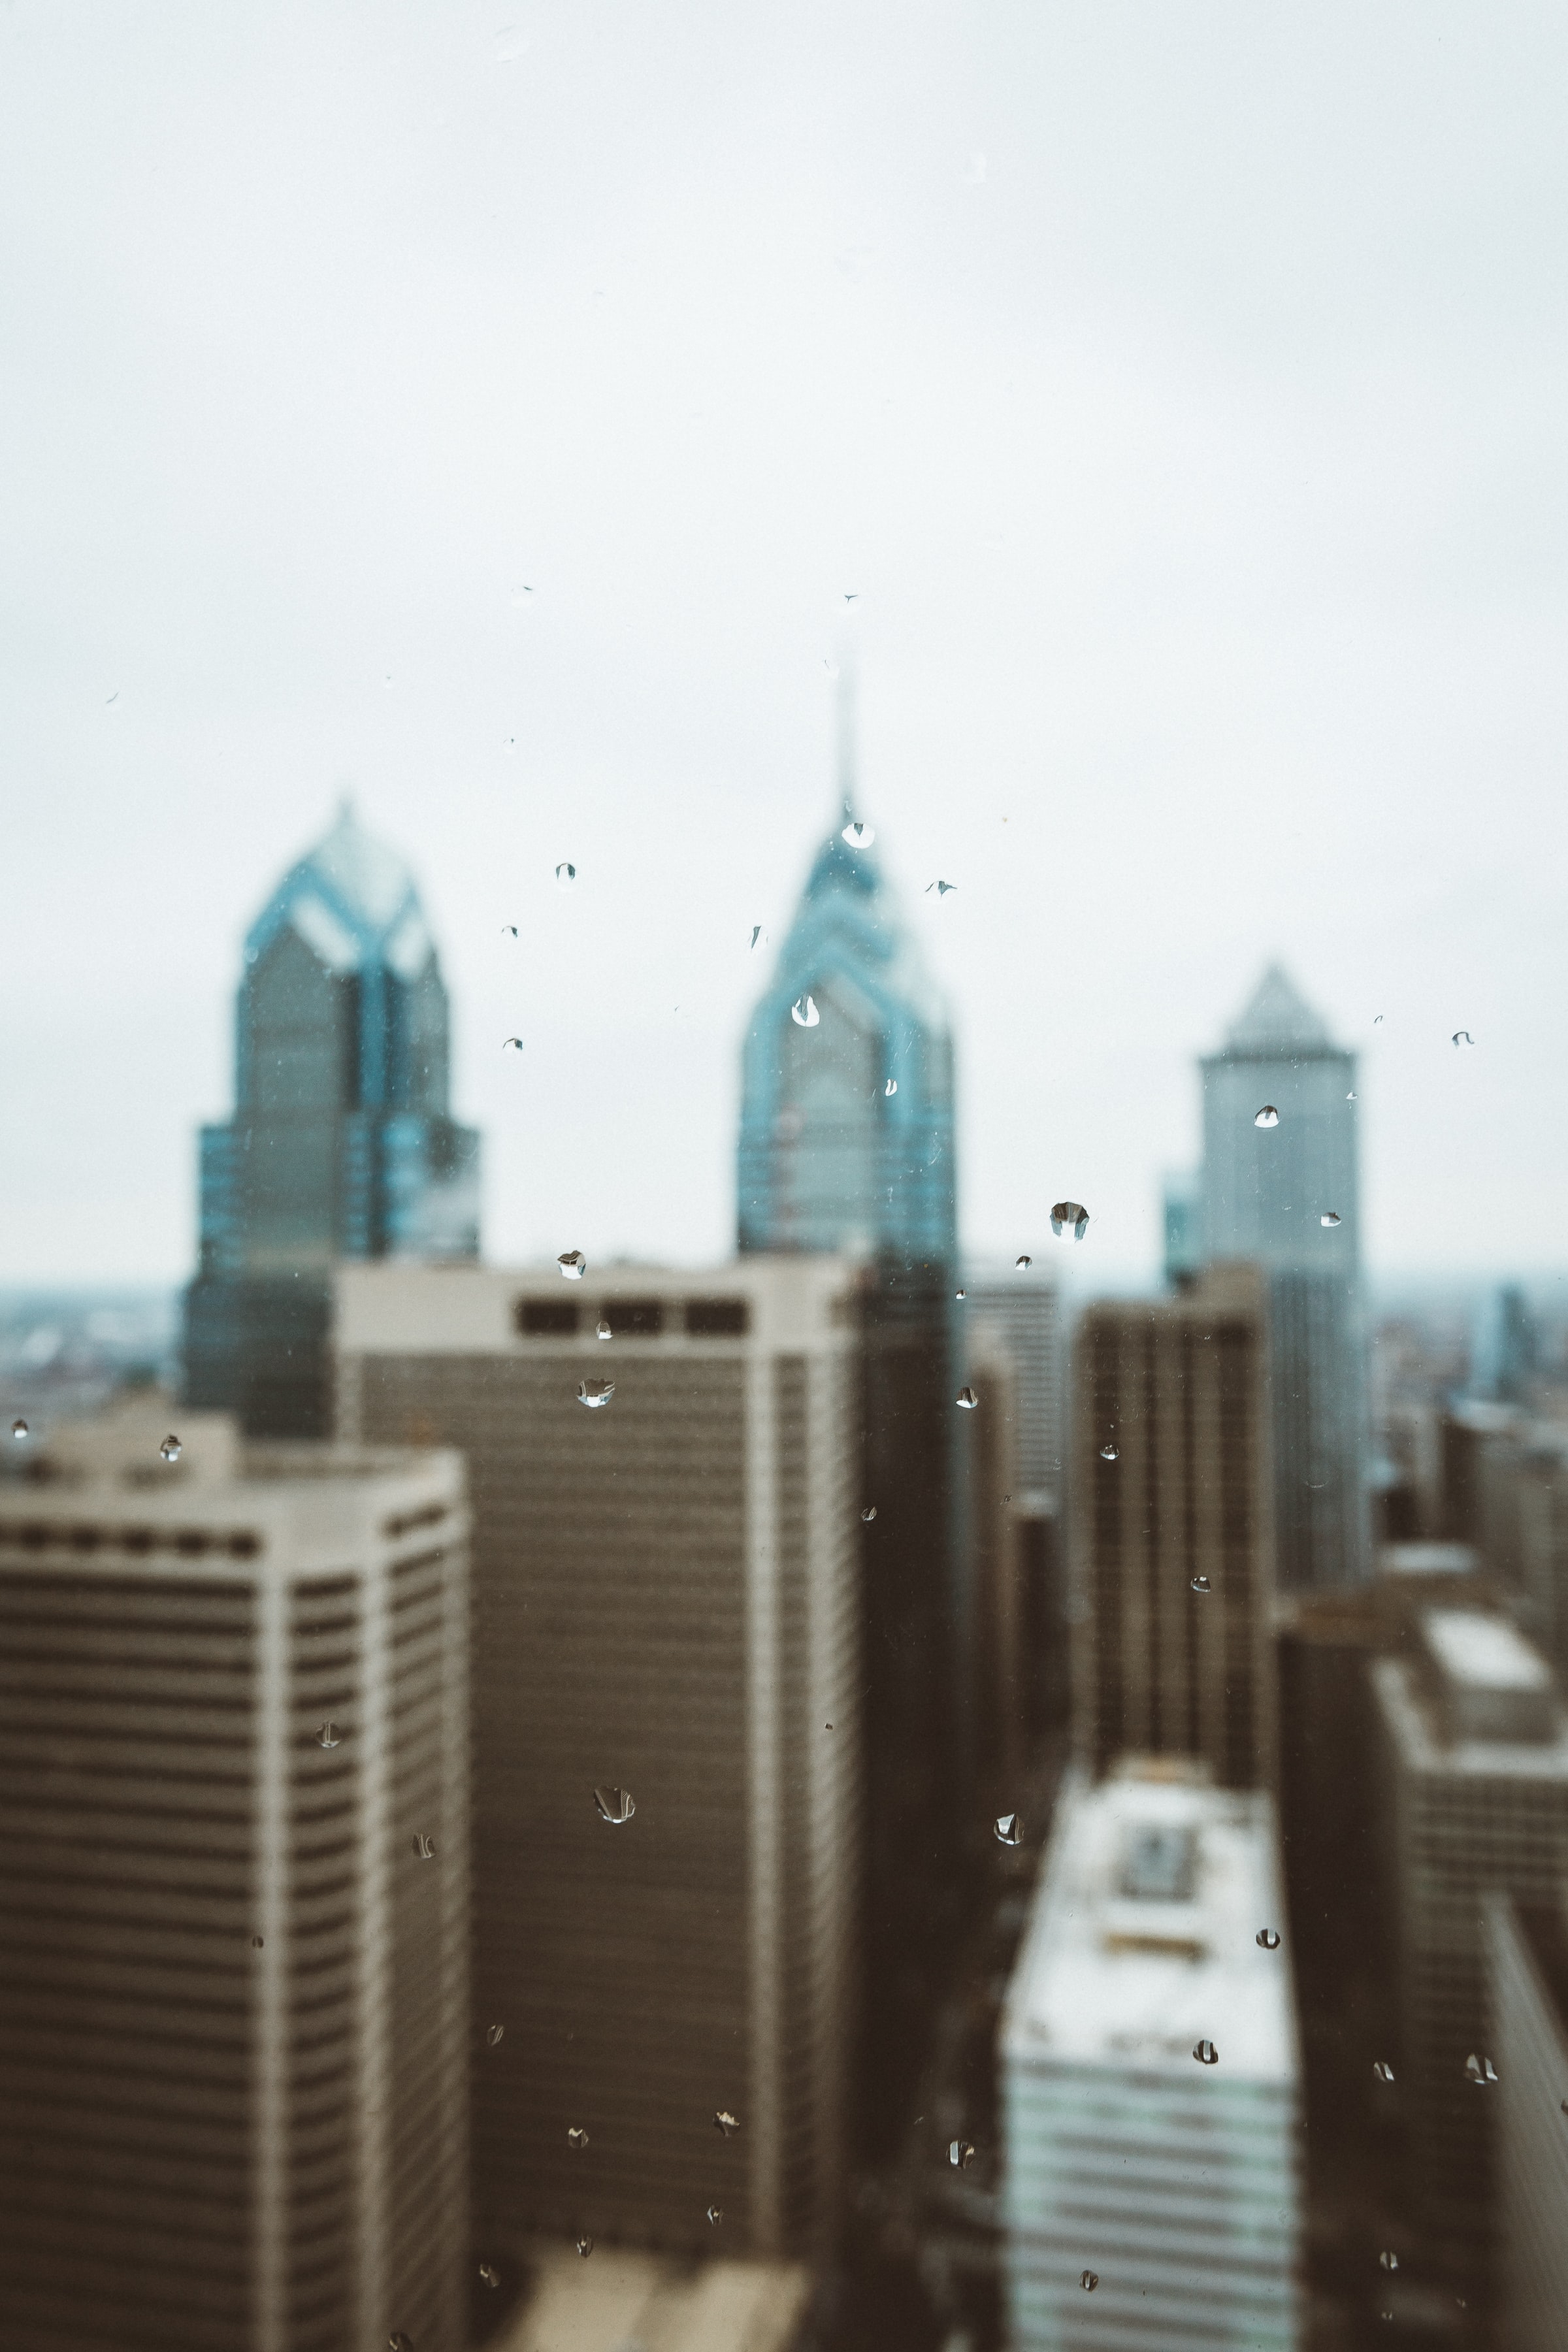 Mobile wallpaper drops, building, miscellanea, miscellaneous, blur, smooth, skyscrapers, tower, towers